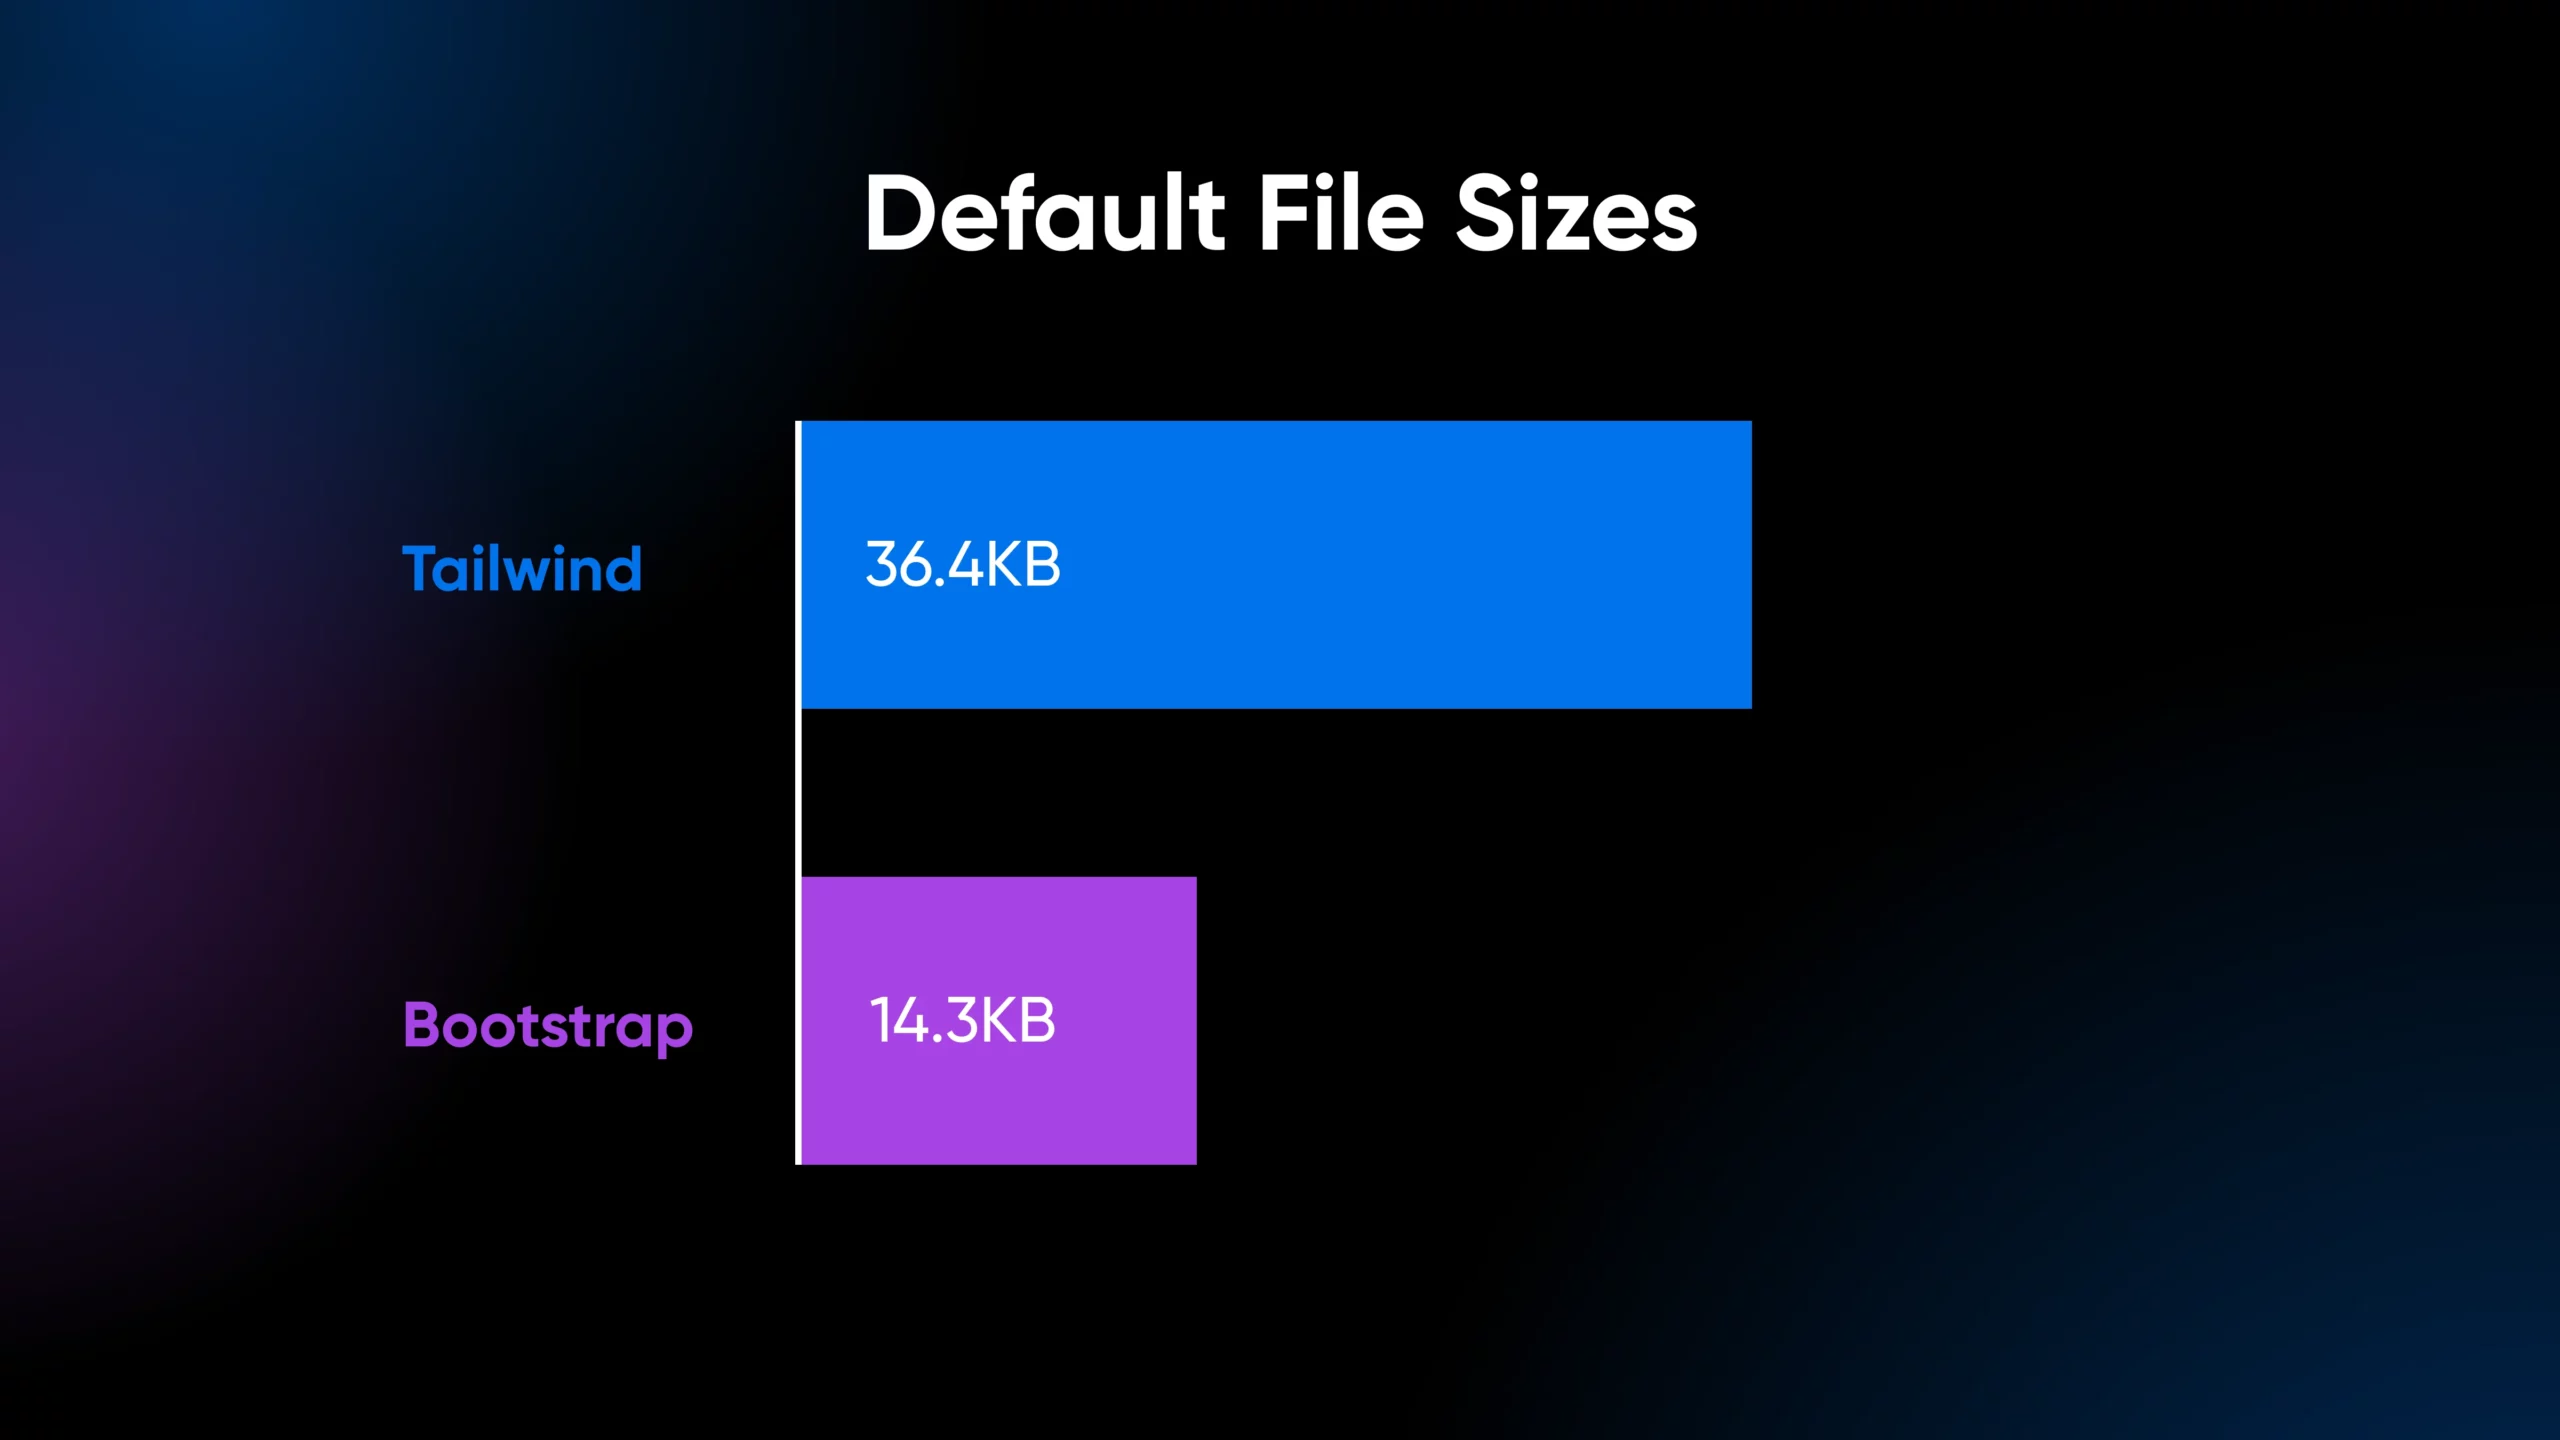 Graph showing "Default File Sizes" for Tailwind vs. Bootstrap at 36.4KB and 14.3KB in blue and purple respectively.